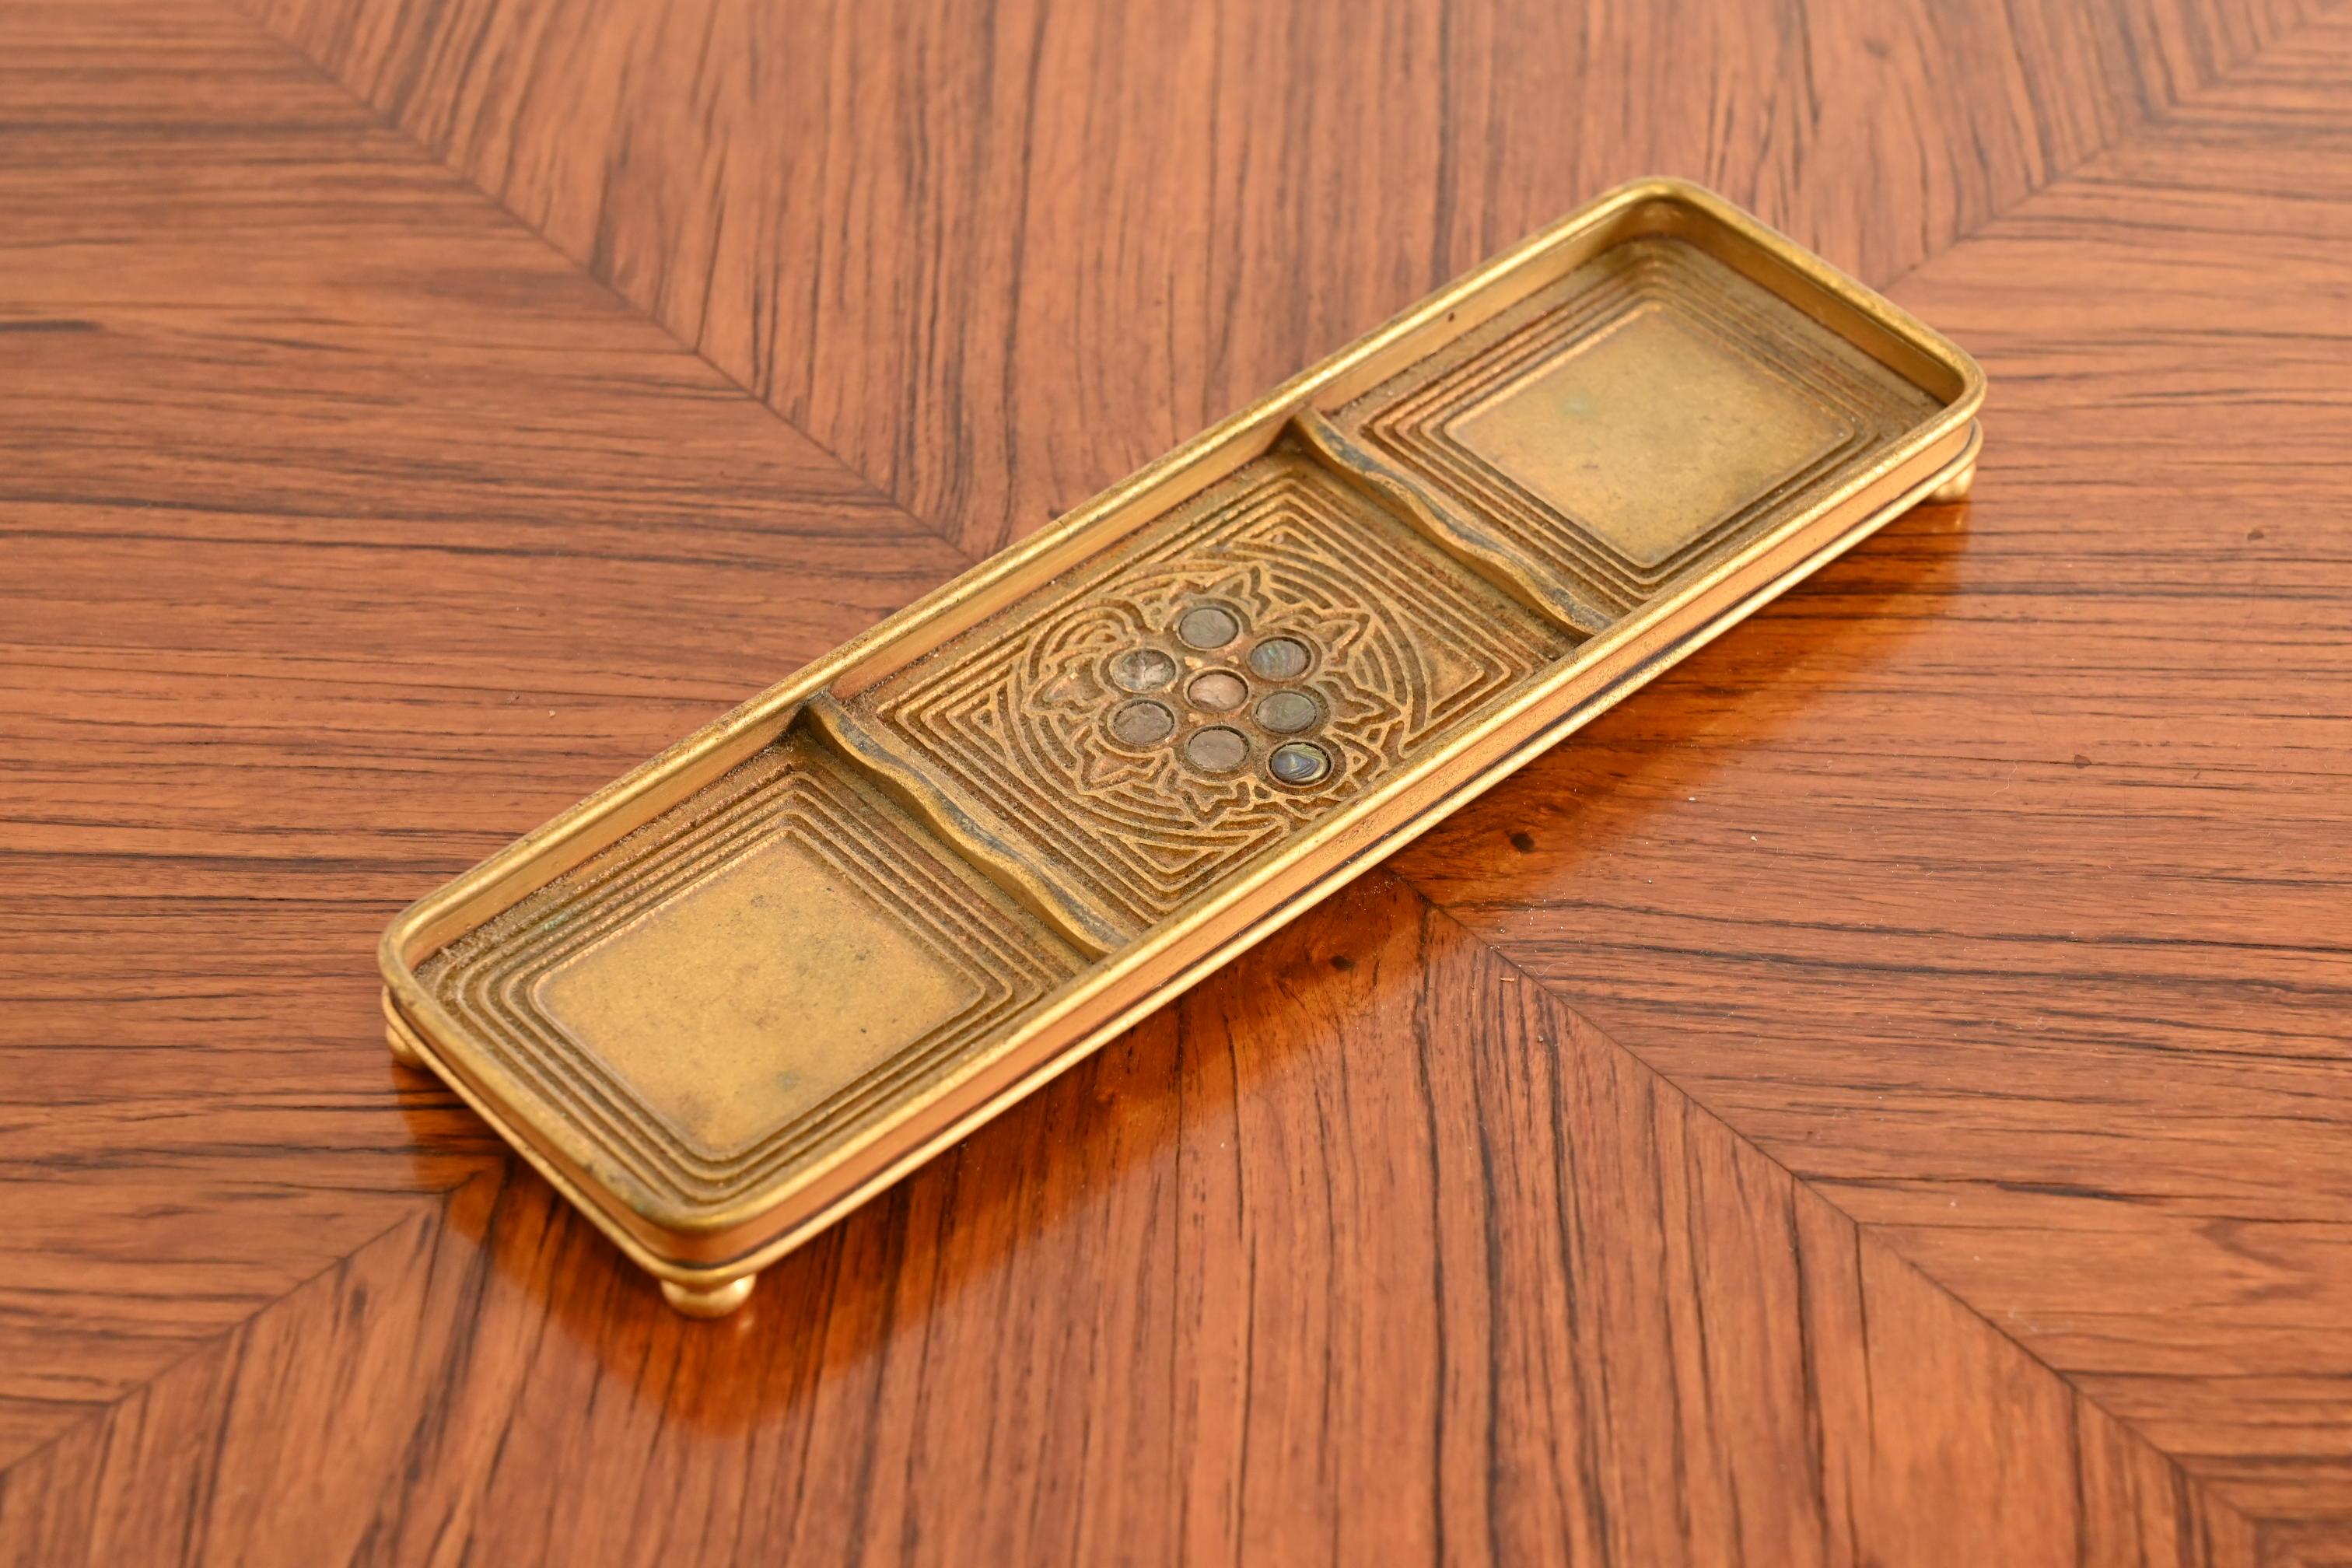 20th Century Tiffany Studios New York Bronze Doré and Abalone Pen Tray For Sale